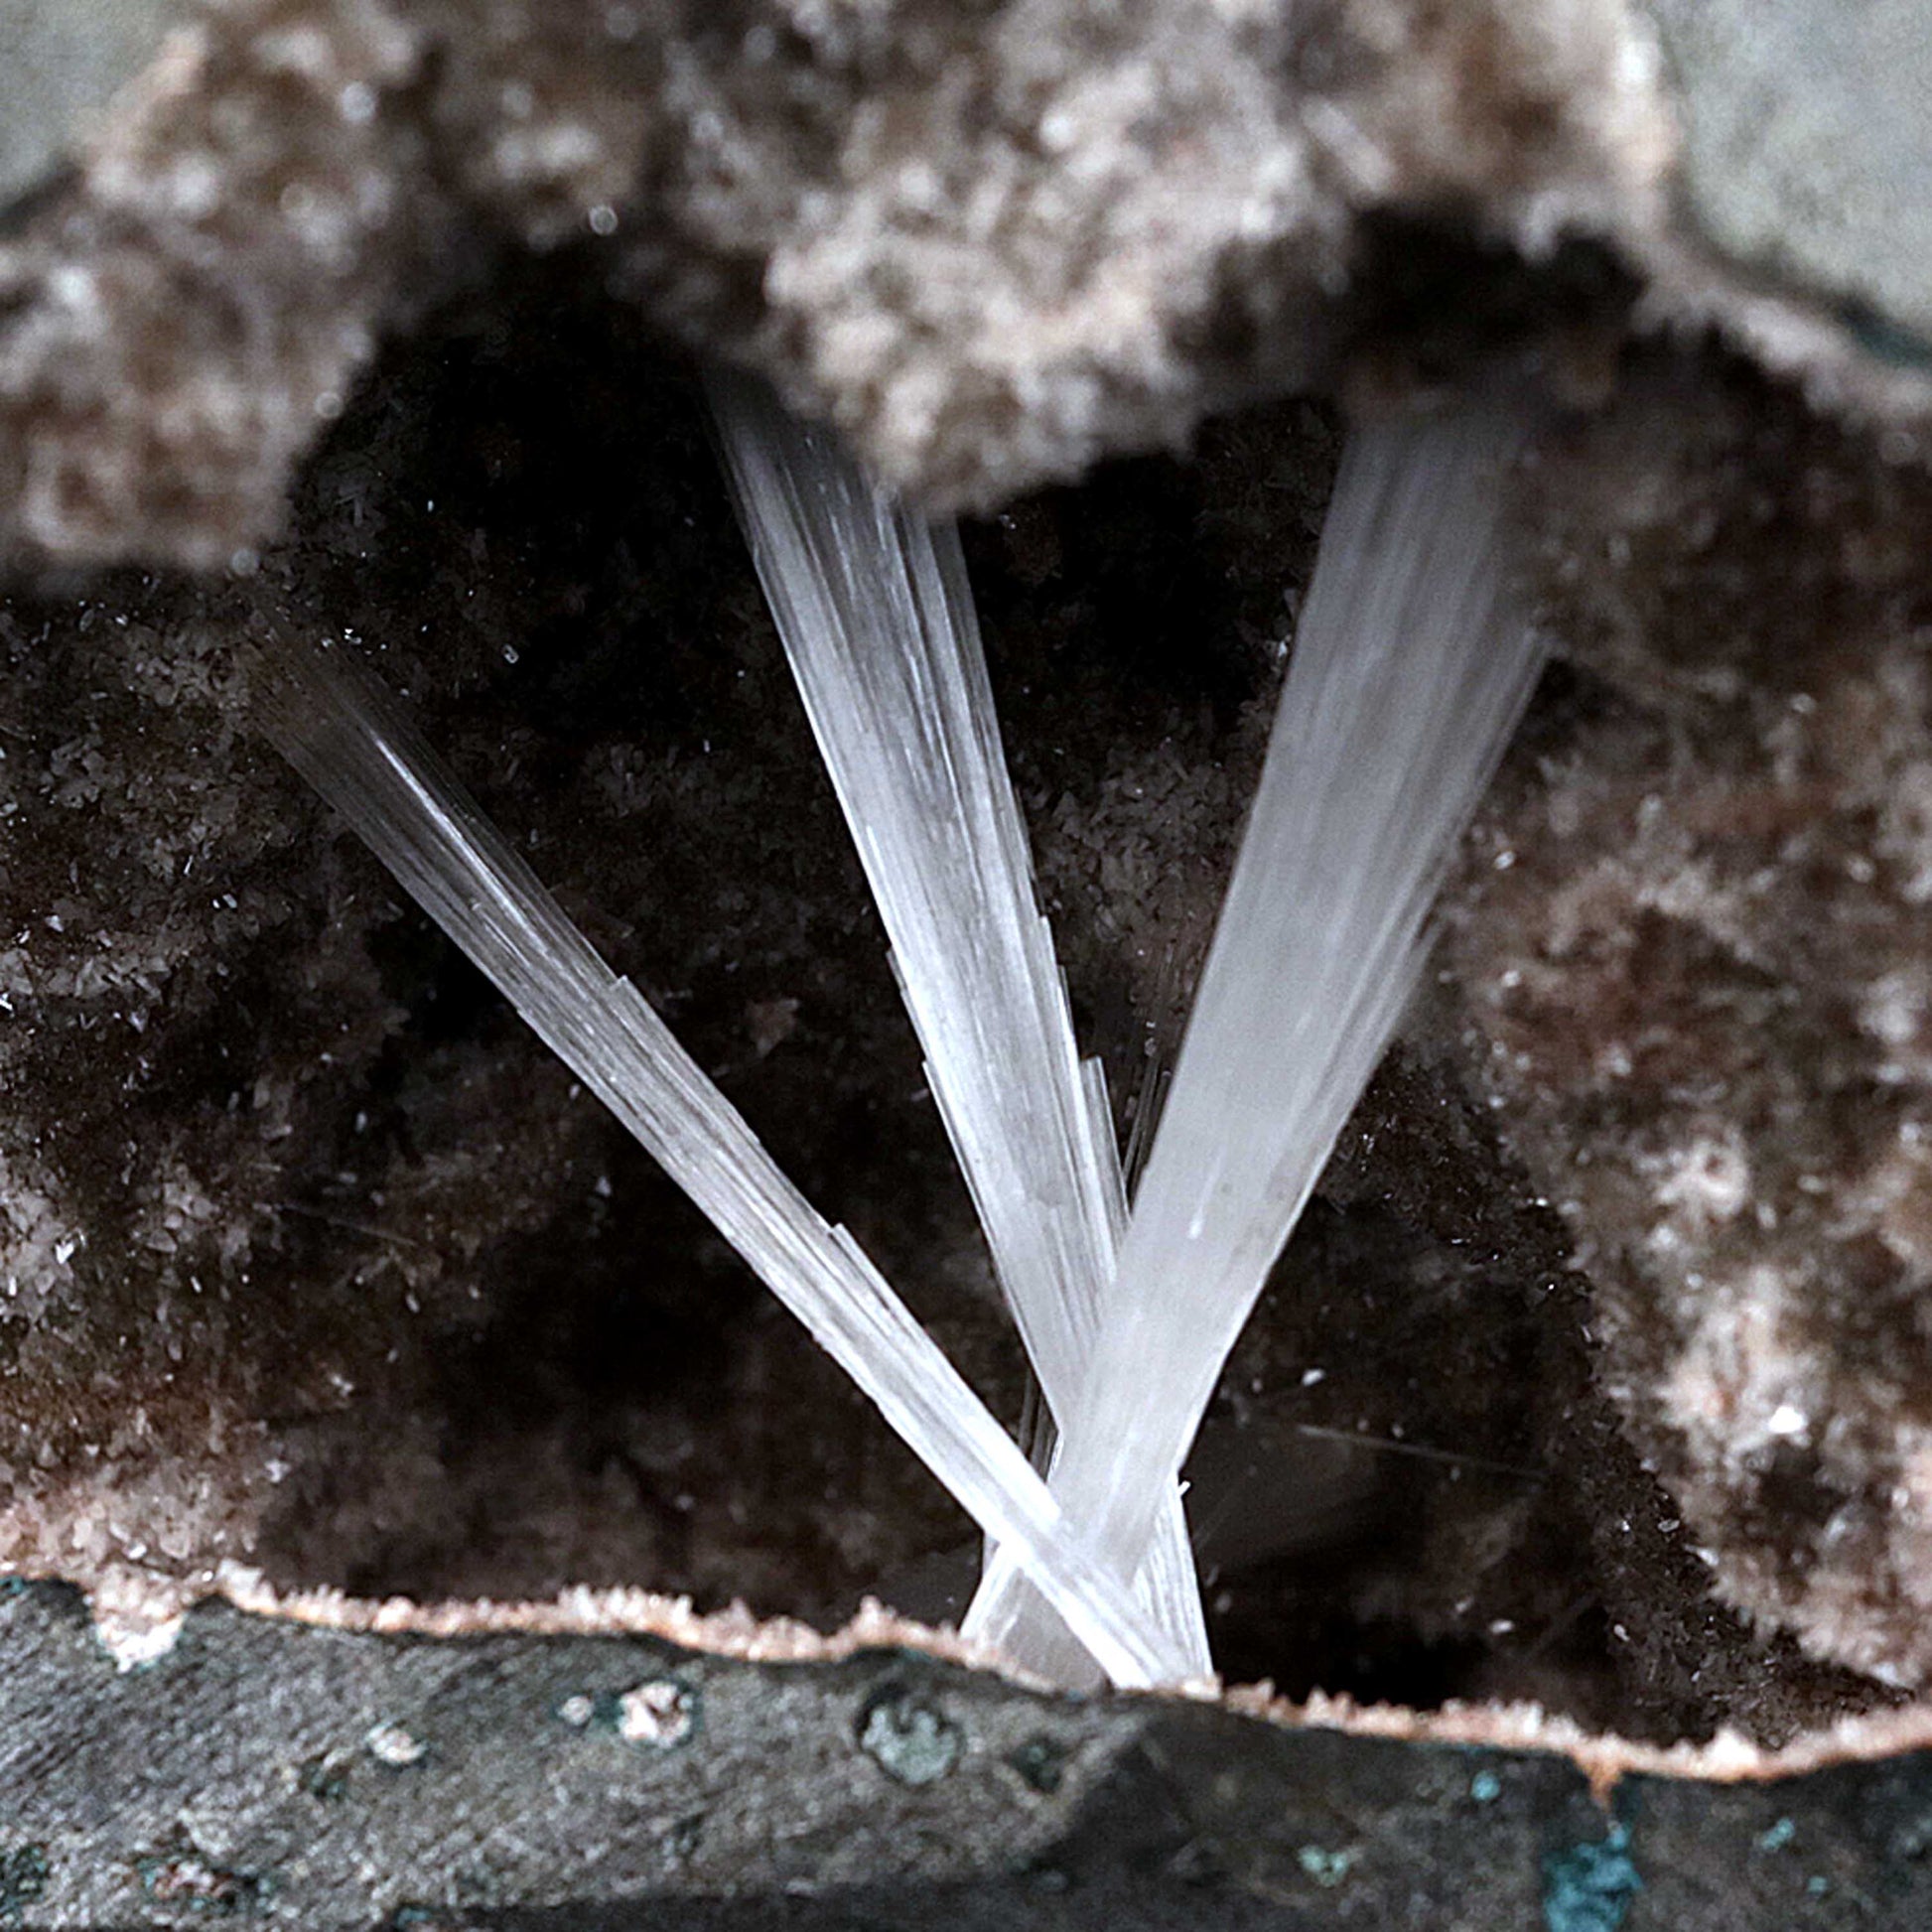 Scolecite Sprays Inside Geode Natural Mineral Specimen # B 4650  https://www.superbminerals.us/products/scolecite-sprays-inside-geode-natural-mineral-specimen-b-4650  Features: A lovely item with a geode lined with beige, glossy Heulandite crystals. The crystals have a pearly, almost glassy sheen and are highly defined.This item is glistening. Very good condition. Primary Mineral(s): ScoleciteSecondary Mineral(s): N/AMatrix: Heulandite15 cm x 9 cm Weight : 1060 Gms Locality: Jalgaon